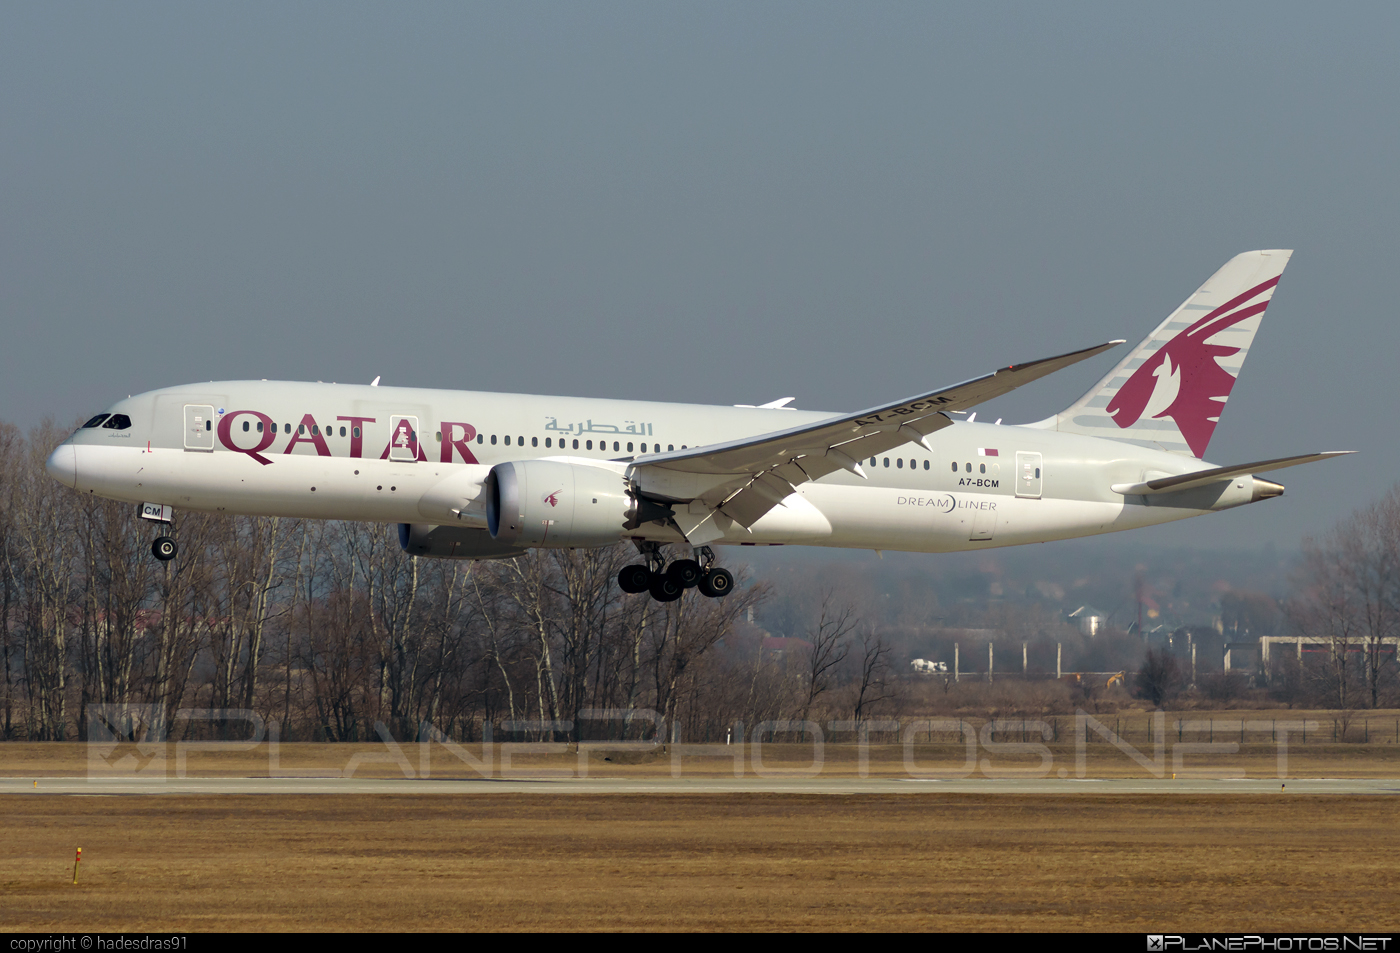 Boeing 787-8 Dreamliner - A7-BCM operated by Qatar Airways #b787 #boeing #boeing787 #dreamliner #qatarairways